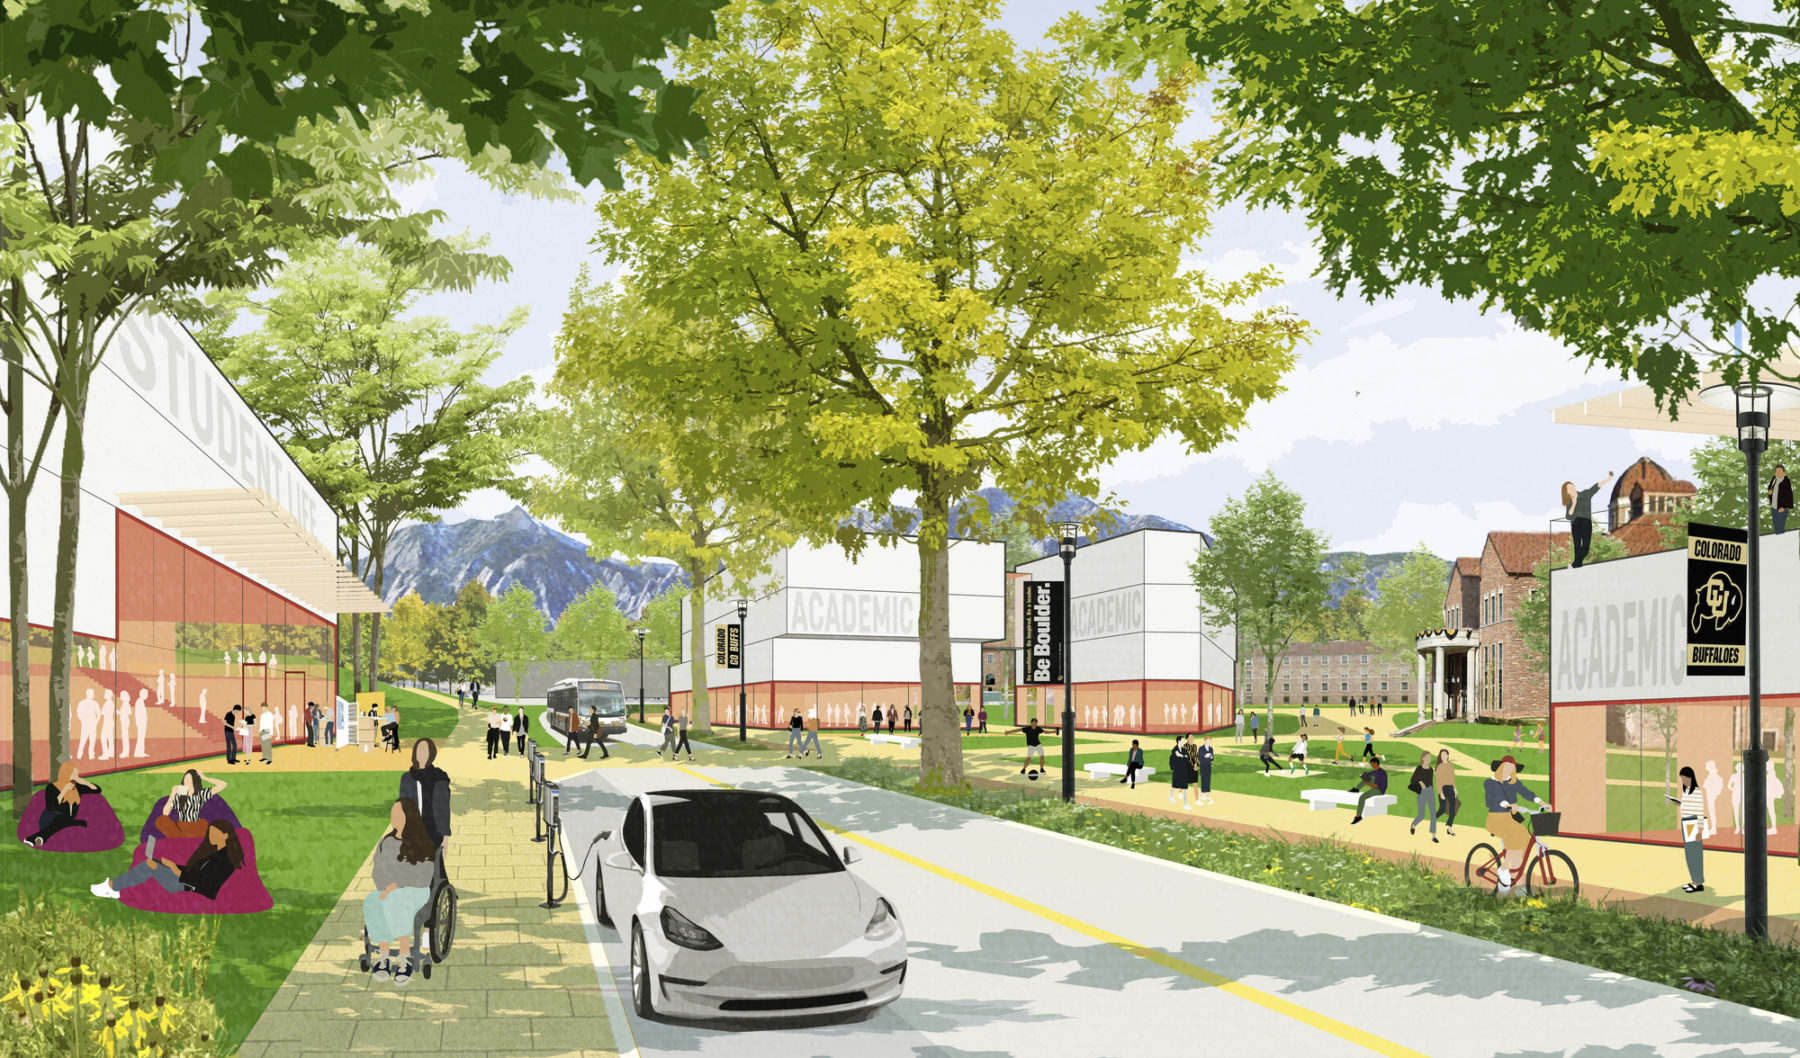 rendering of street along the business quad - a car is parked in the foreground and people walk and bike along the paths